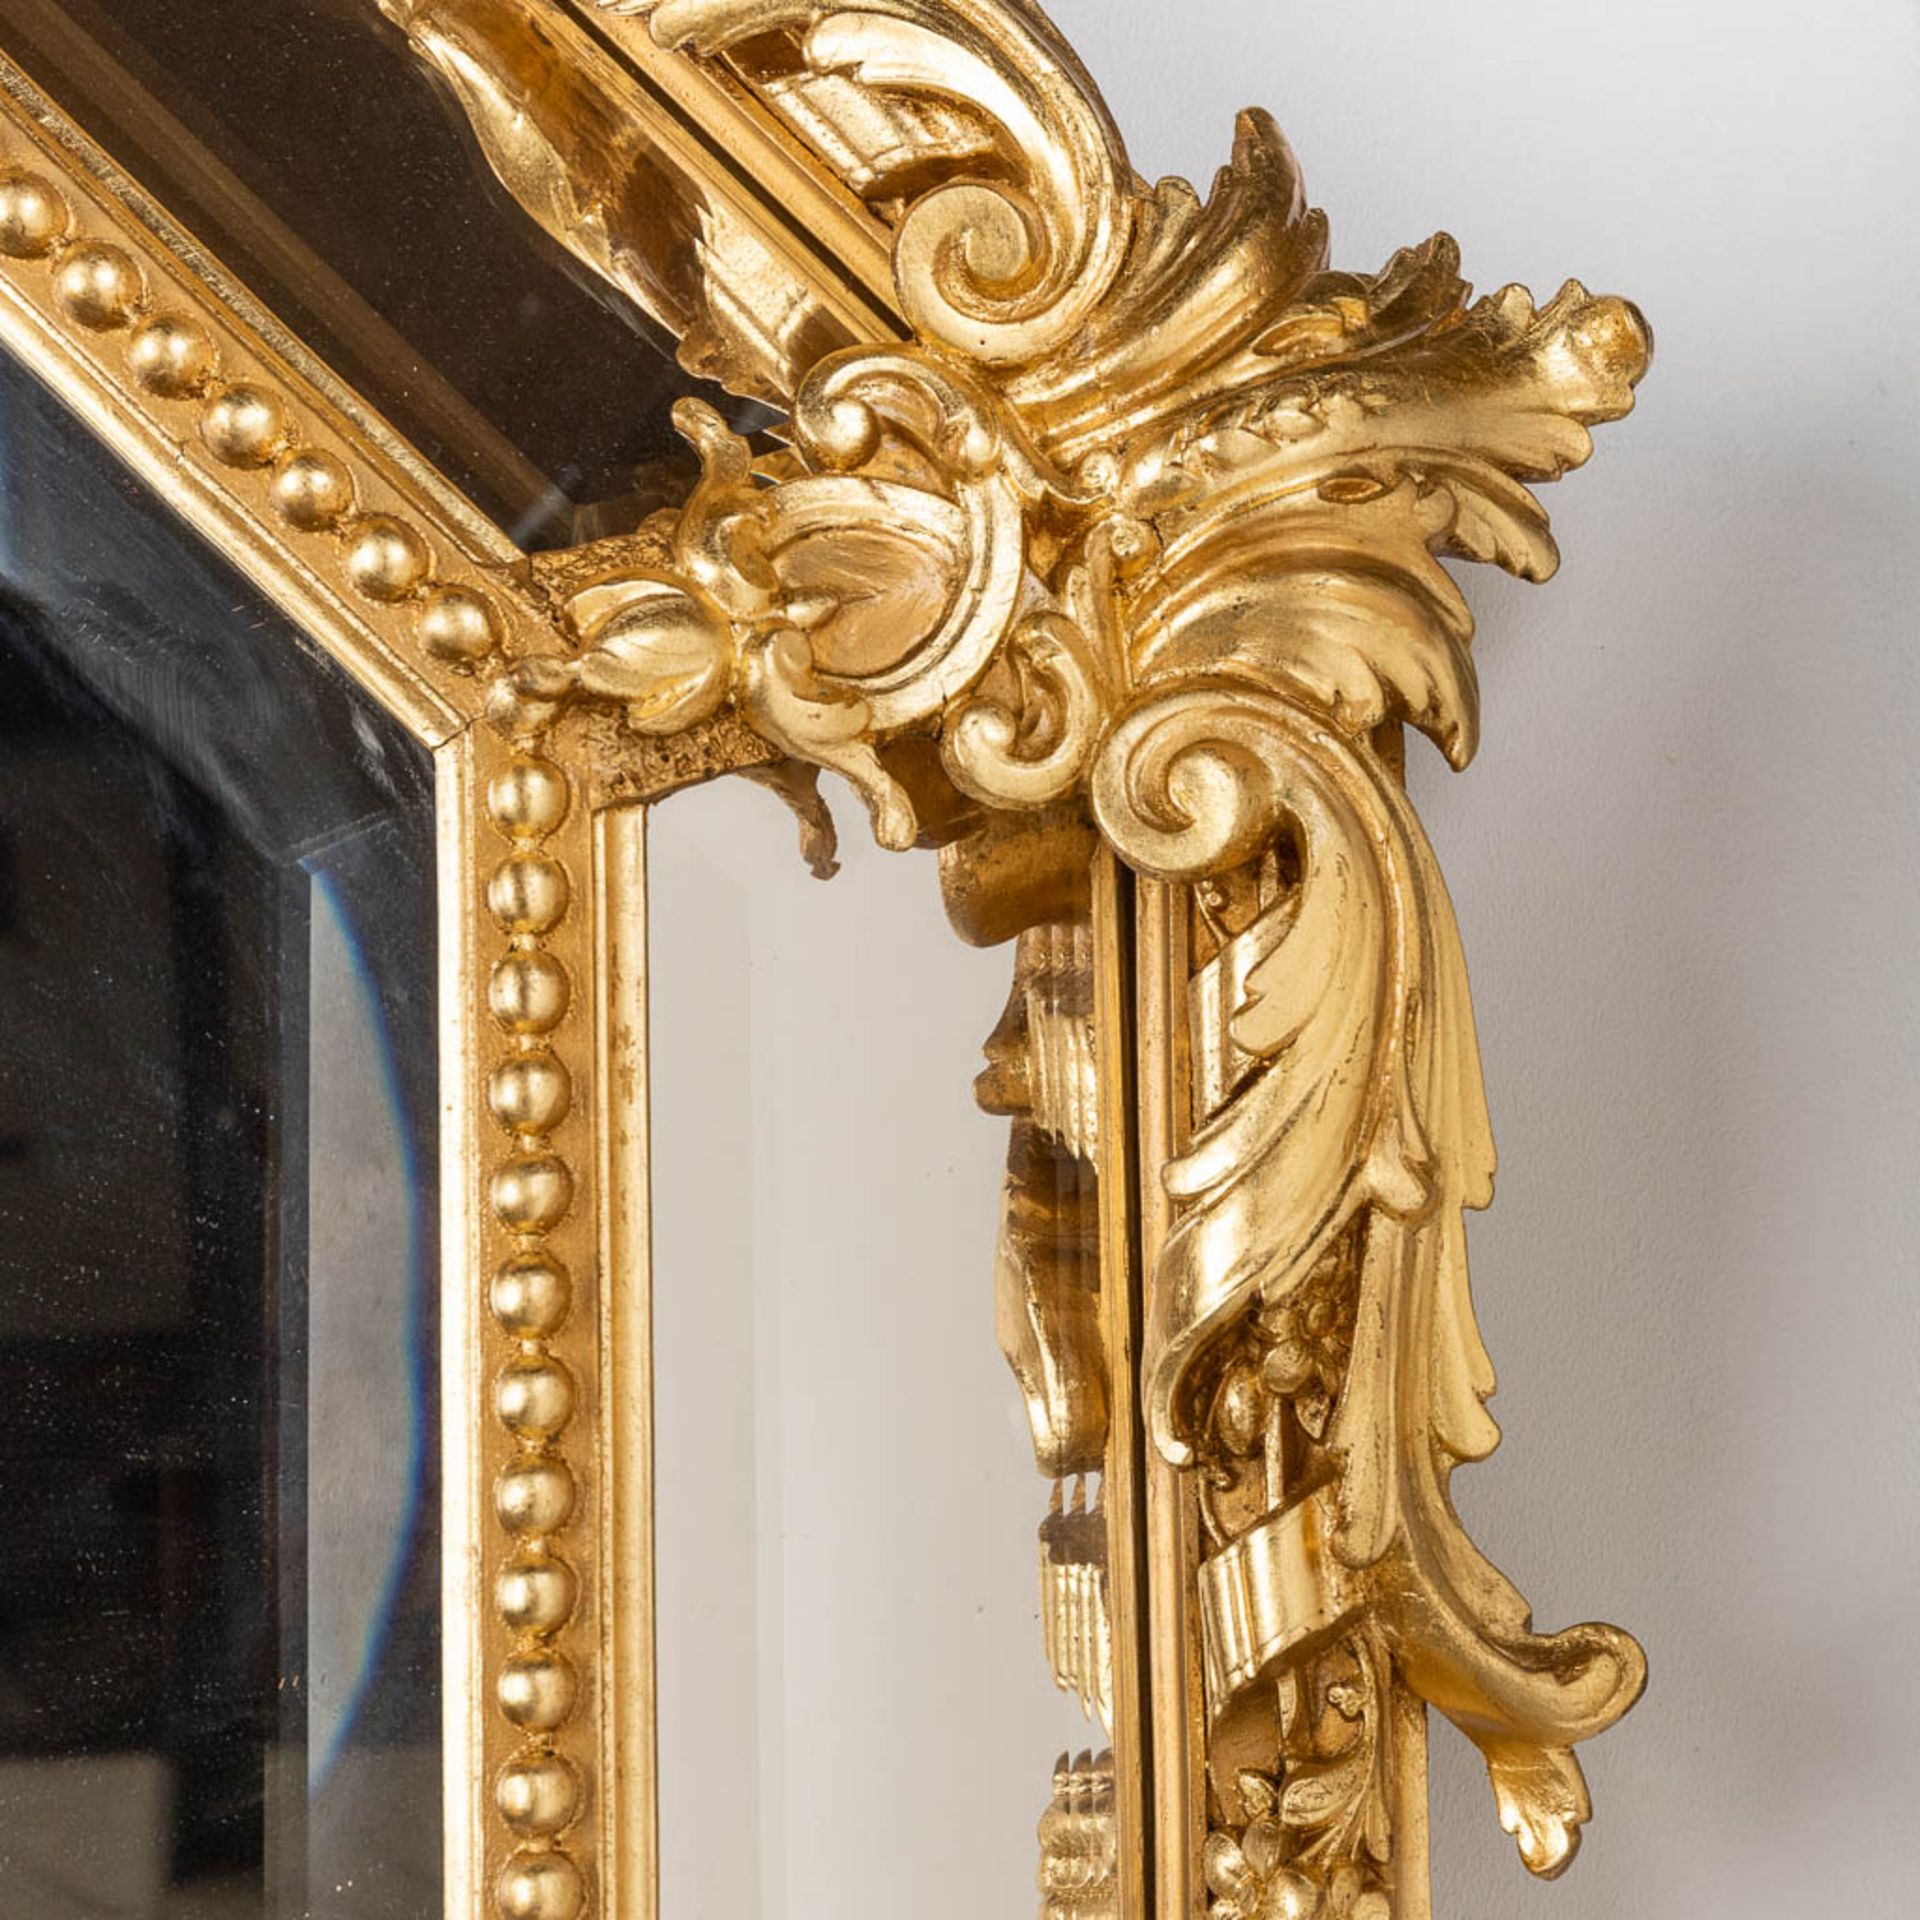 An antique mirror, sculptured gilt stucco and facetted glass, Louis XV style. 19th C. (W:98 x H:140  - Bild 5 aus 9